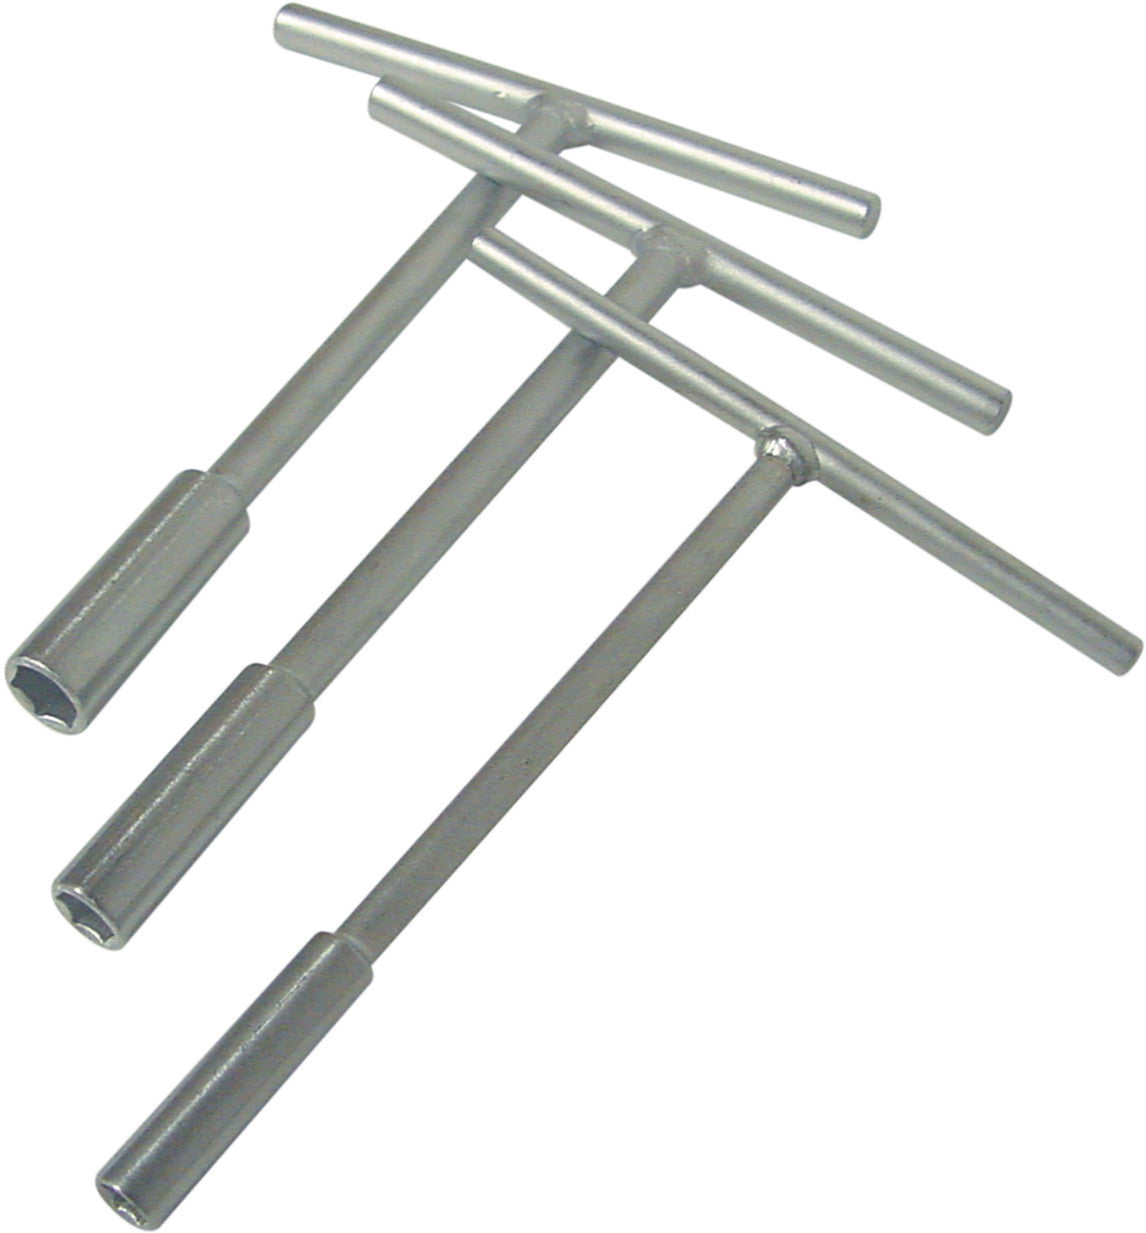 Set of 3 T-handle Mini Wrenches sizes 8, 10, 12mm